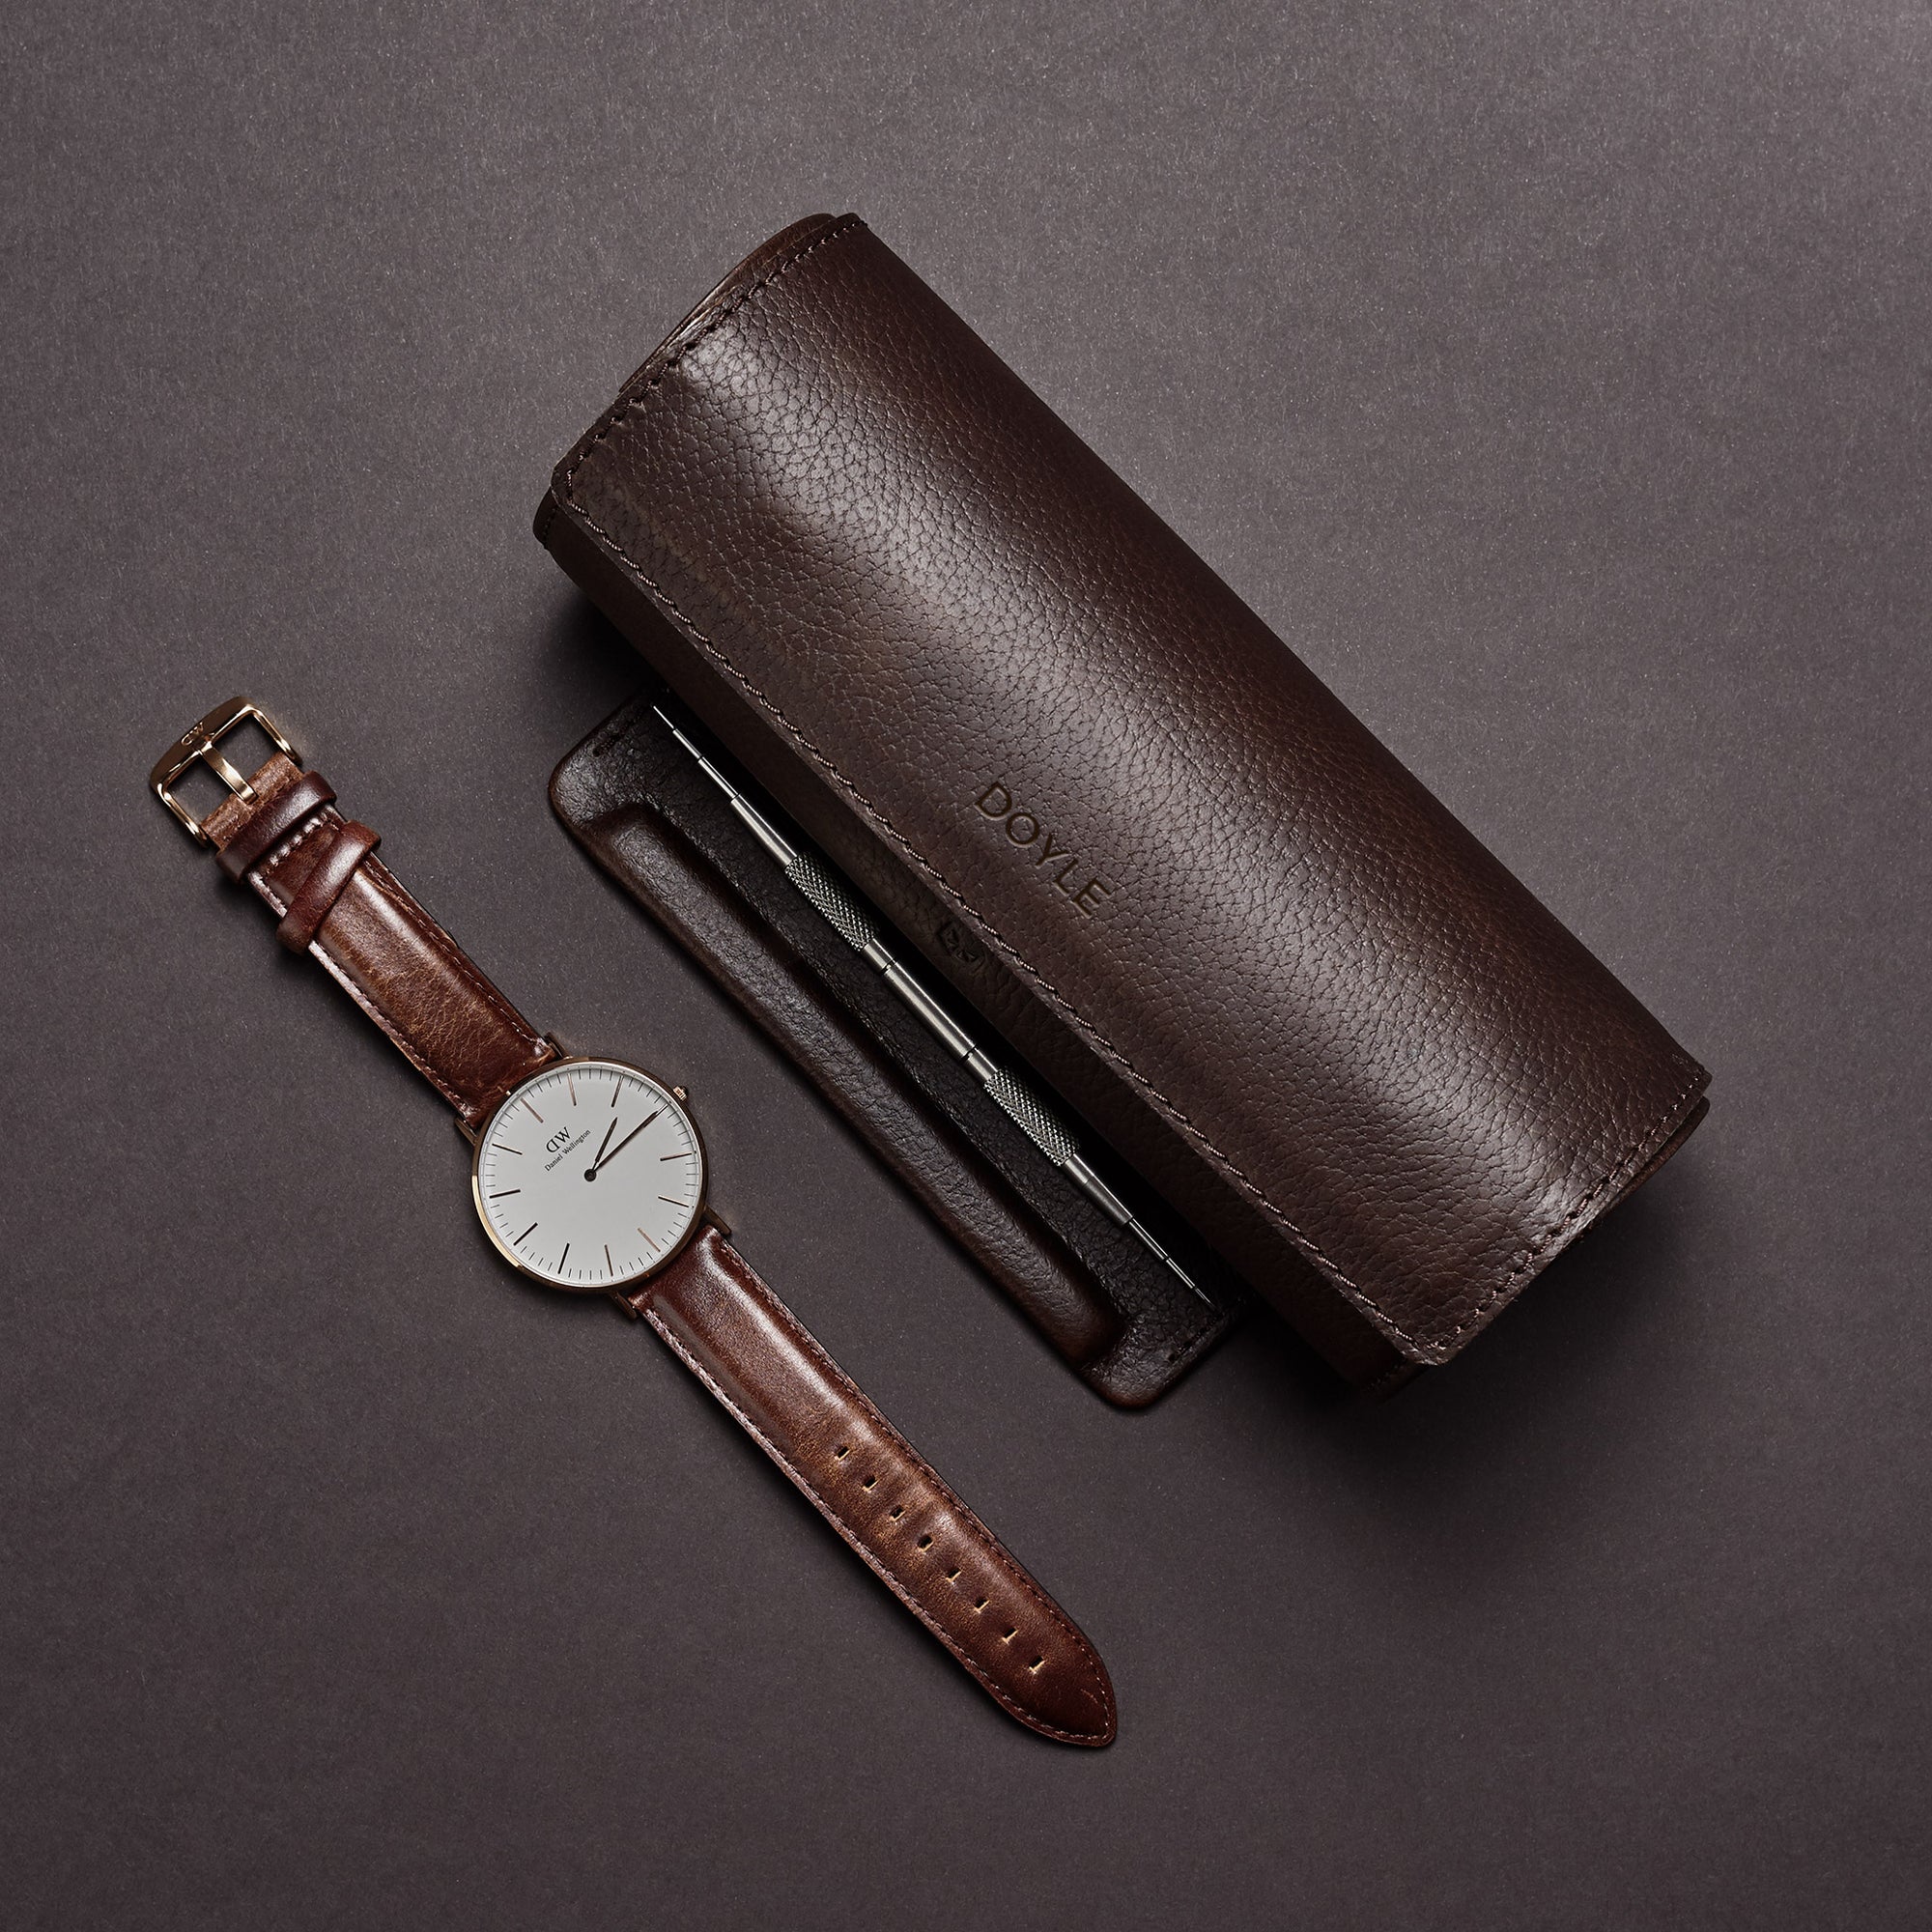 Leather watch cases for men dark brown by Capra Leather